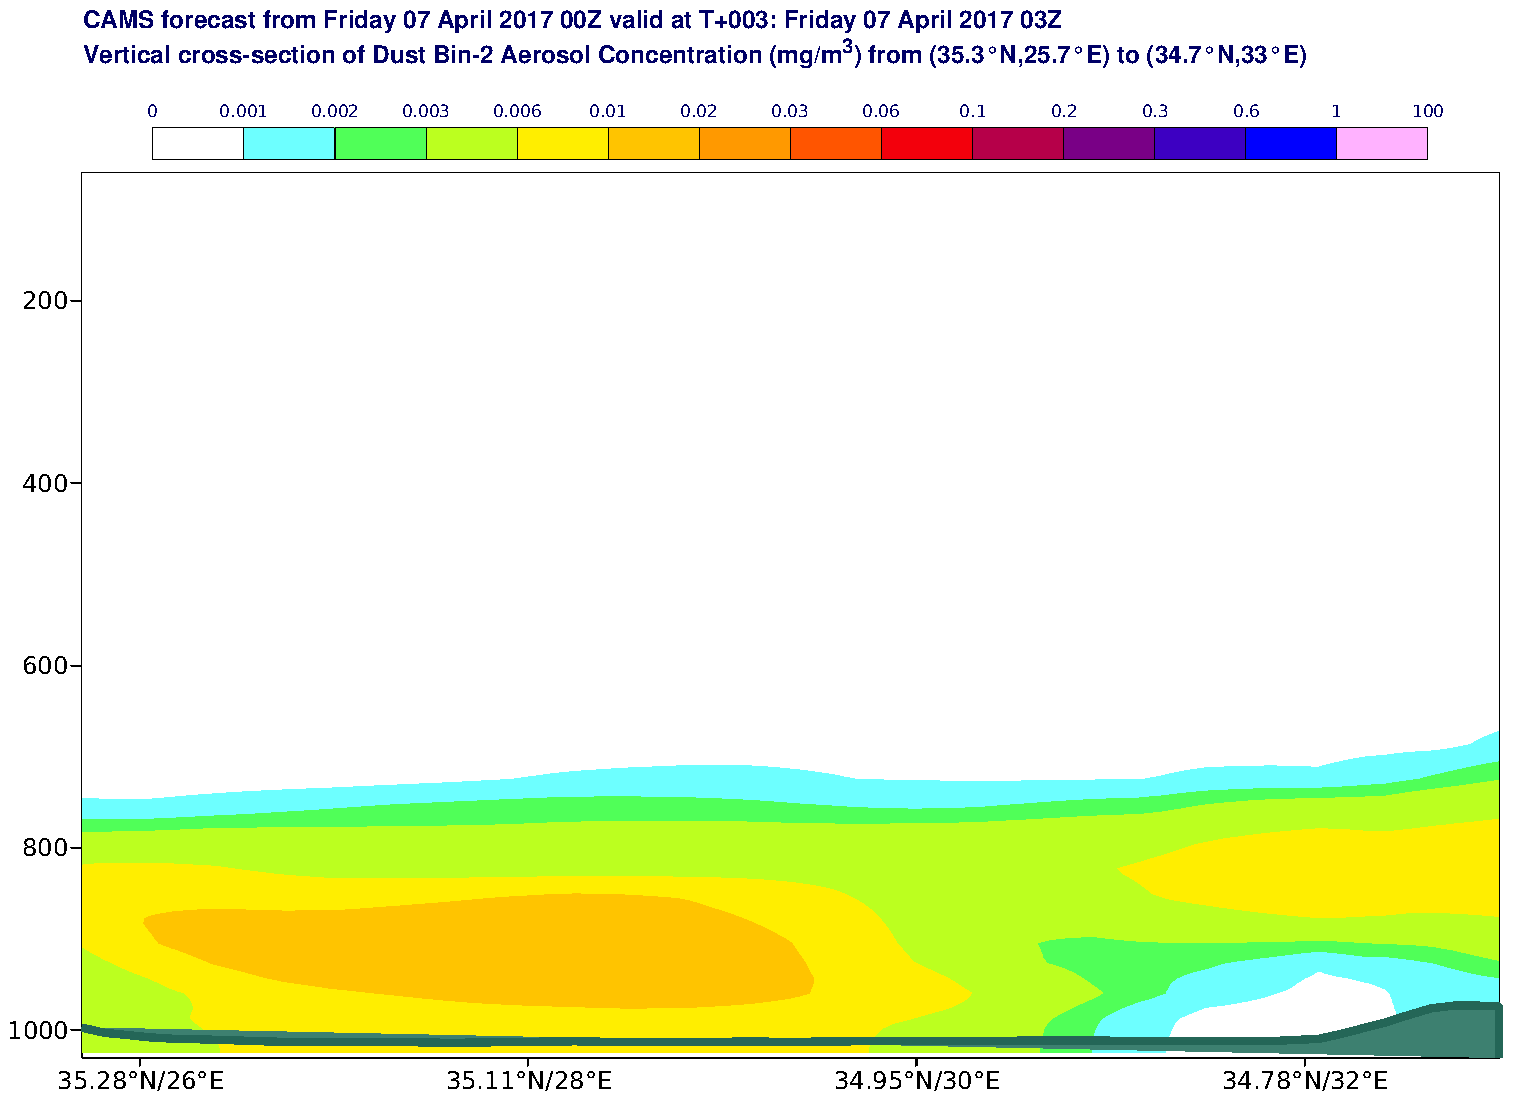 Vertical cross-section of Dust Bin-2 Aerosol Concentration (mg/m3) valid at T3 - 2017-04-07 03:00